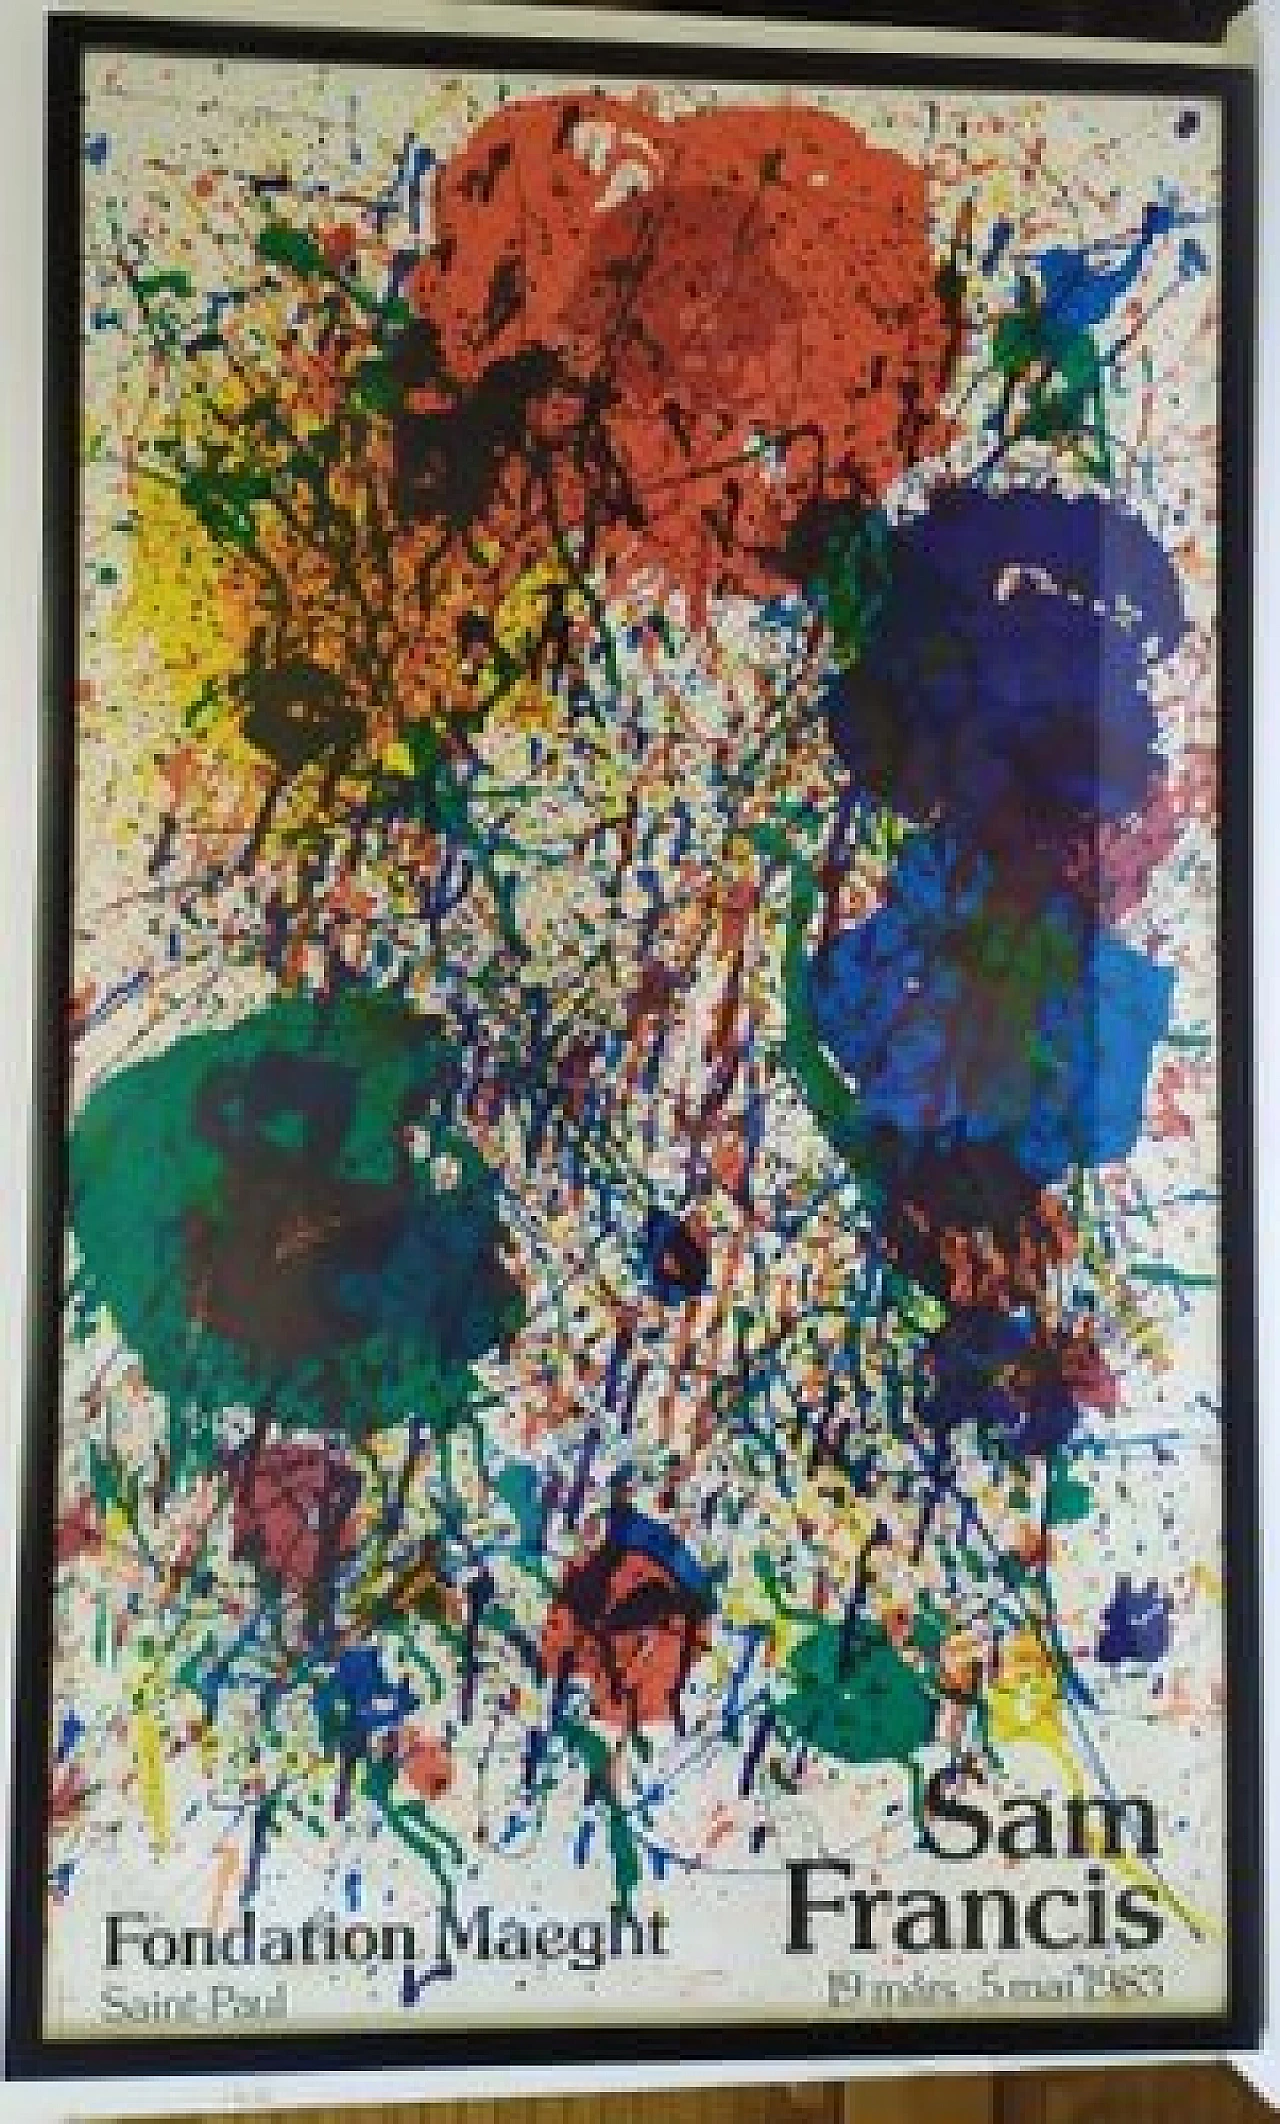 Sam Francis, abstract composition, lithography, 1983 2